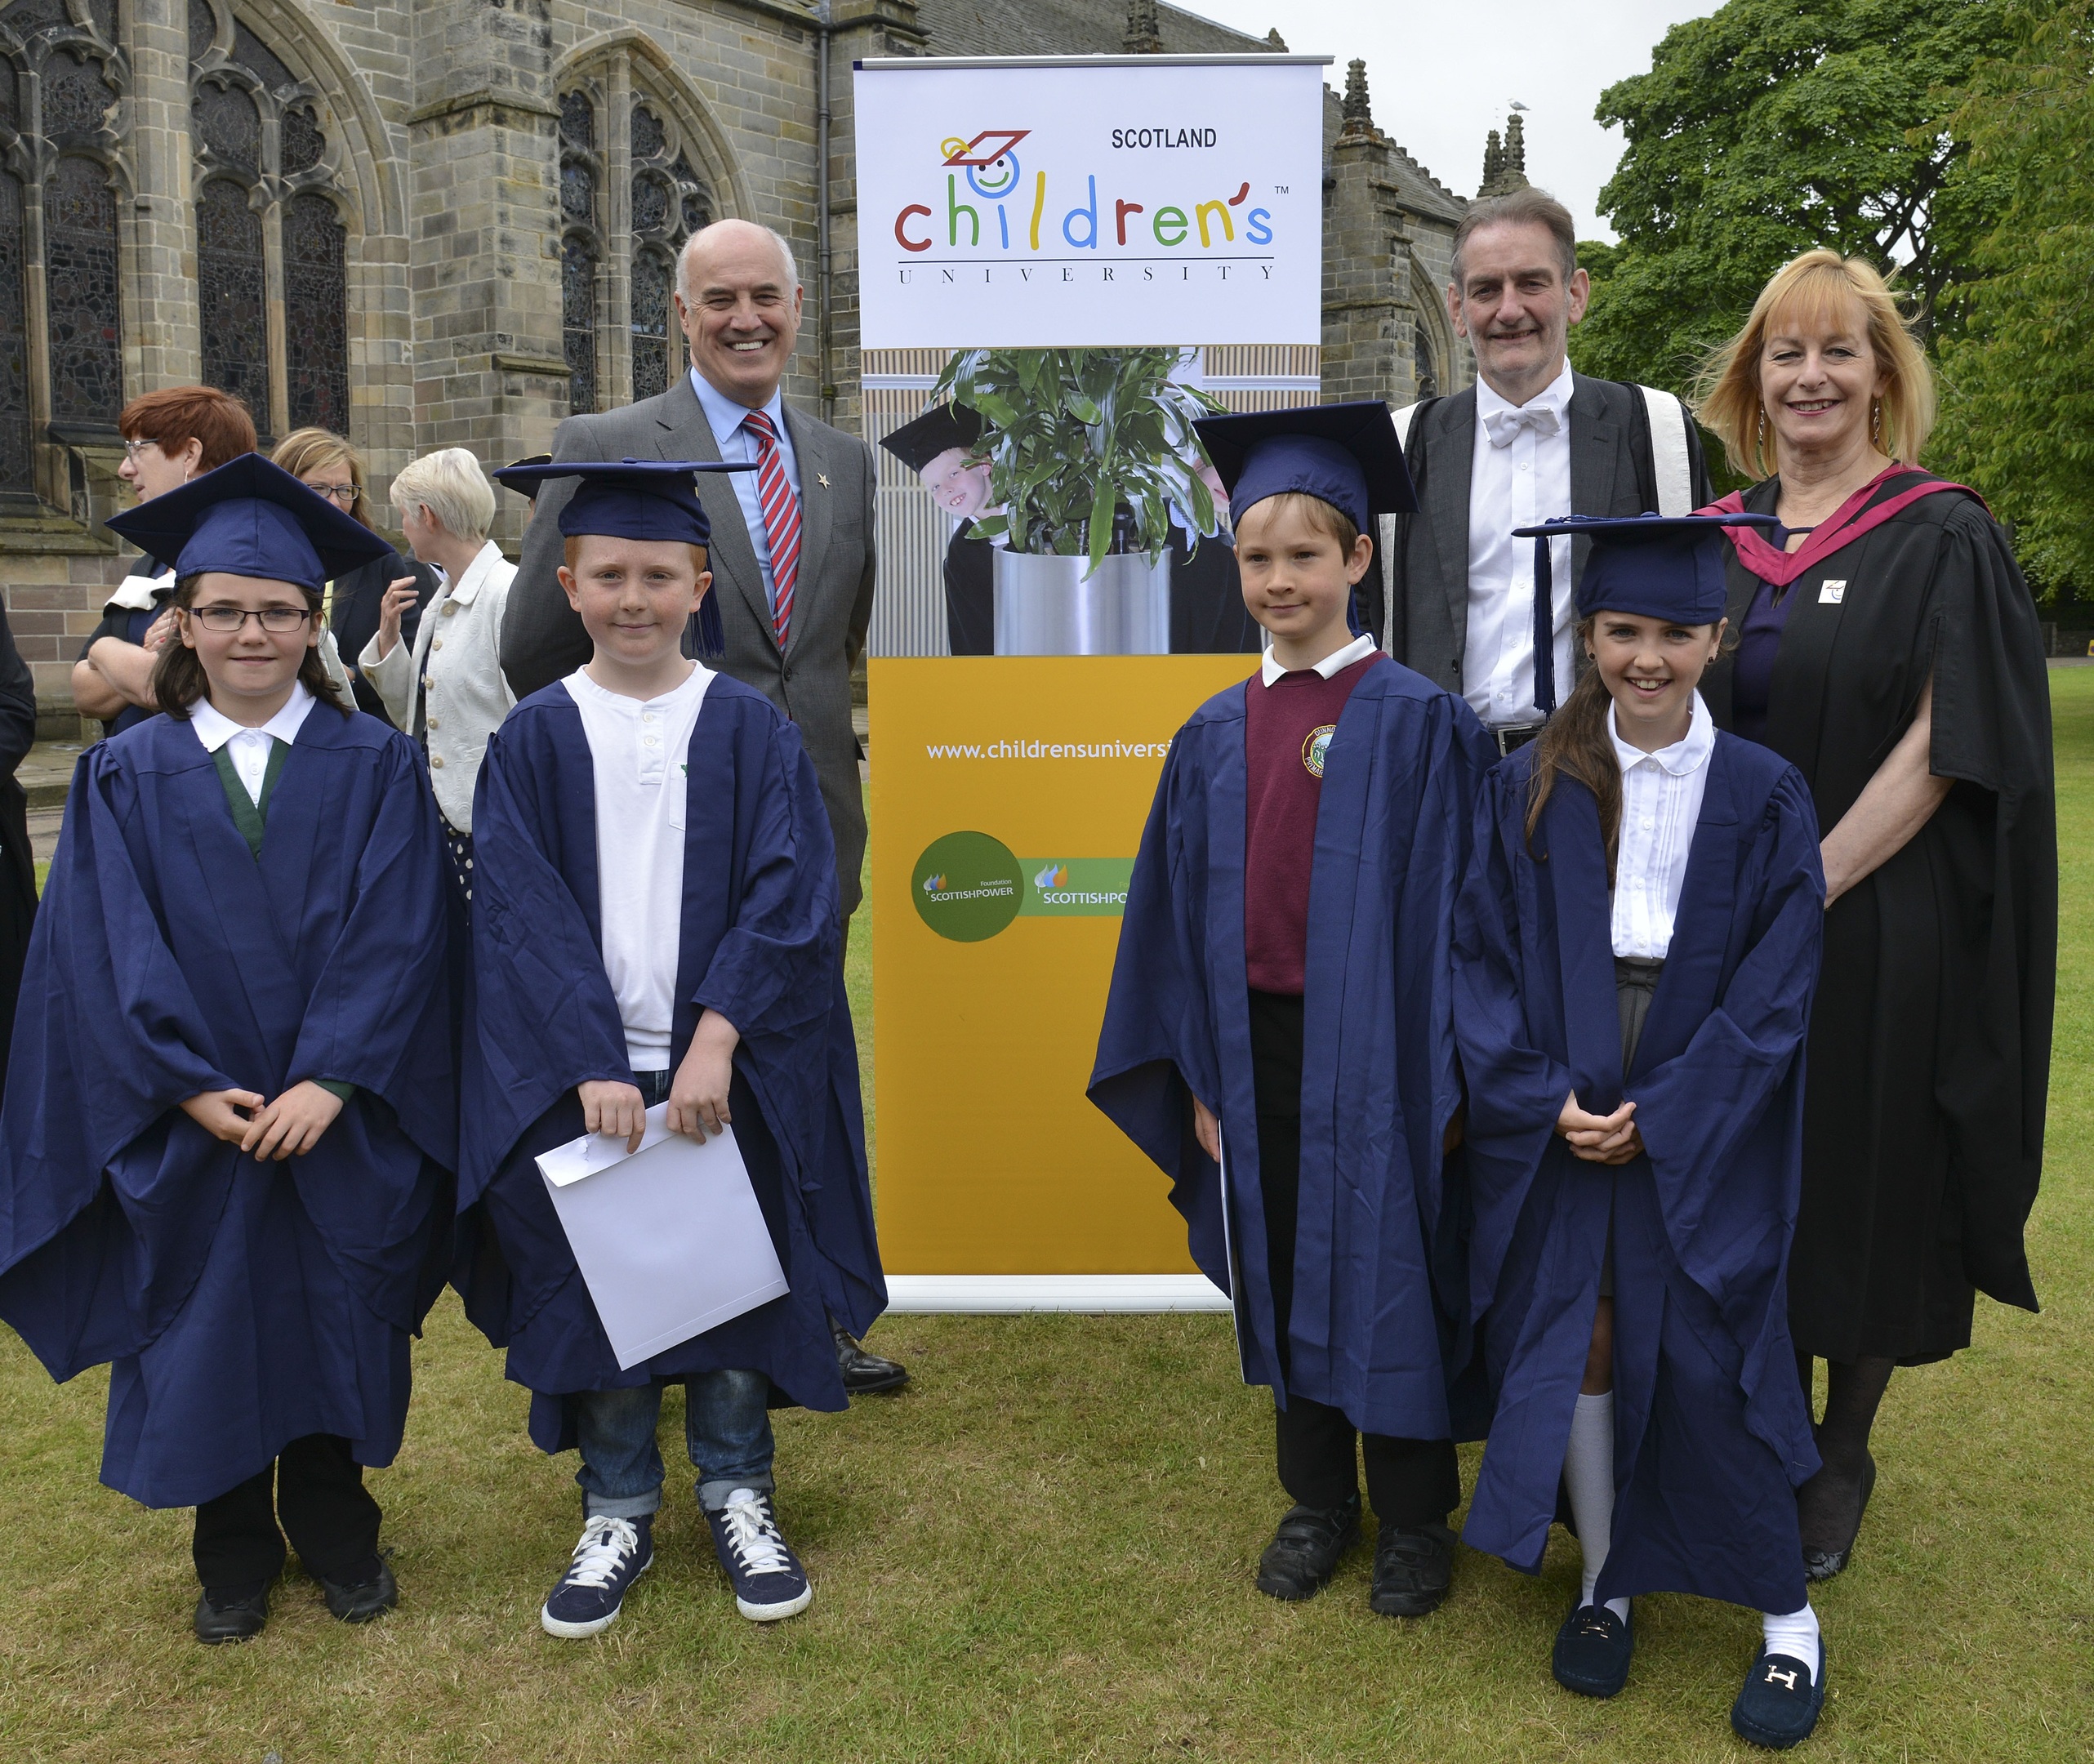 The pupils at the ceremony on Elphinstone Hall